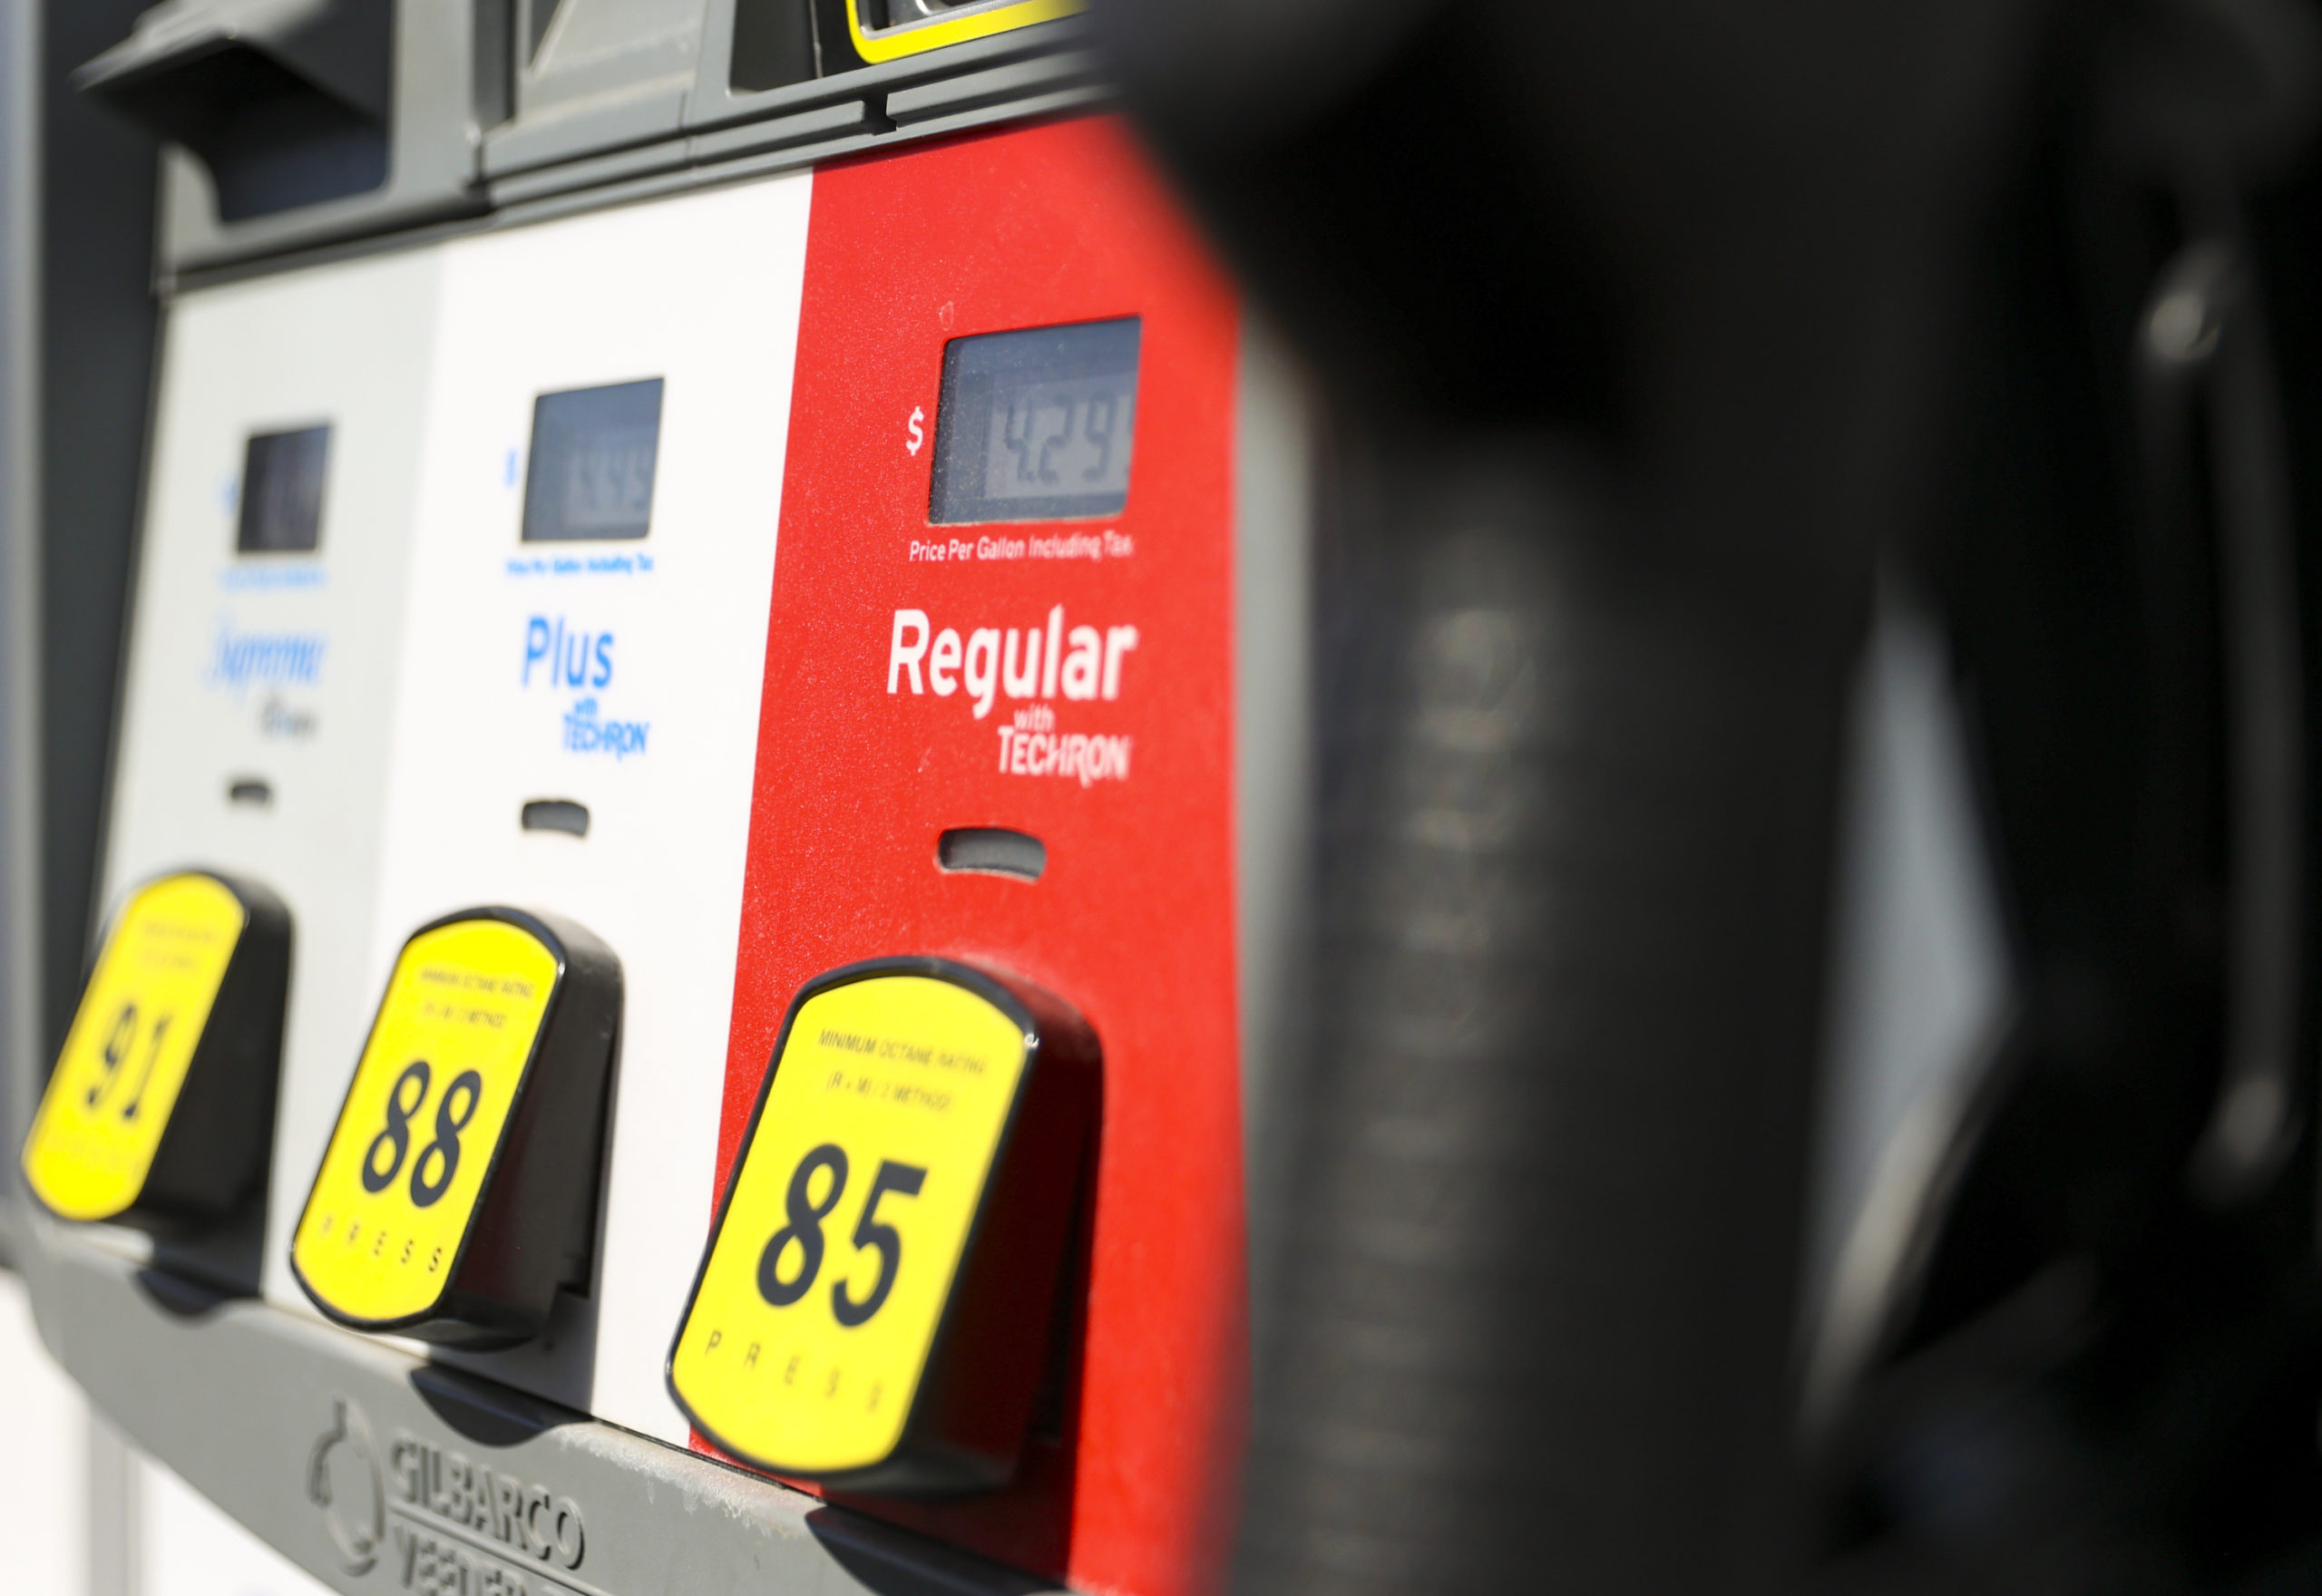 Rising gas prices are leading people to use apps like GasBuddy....